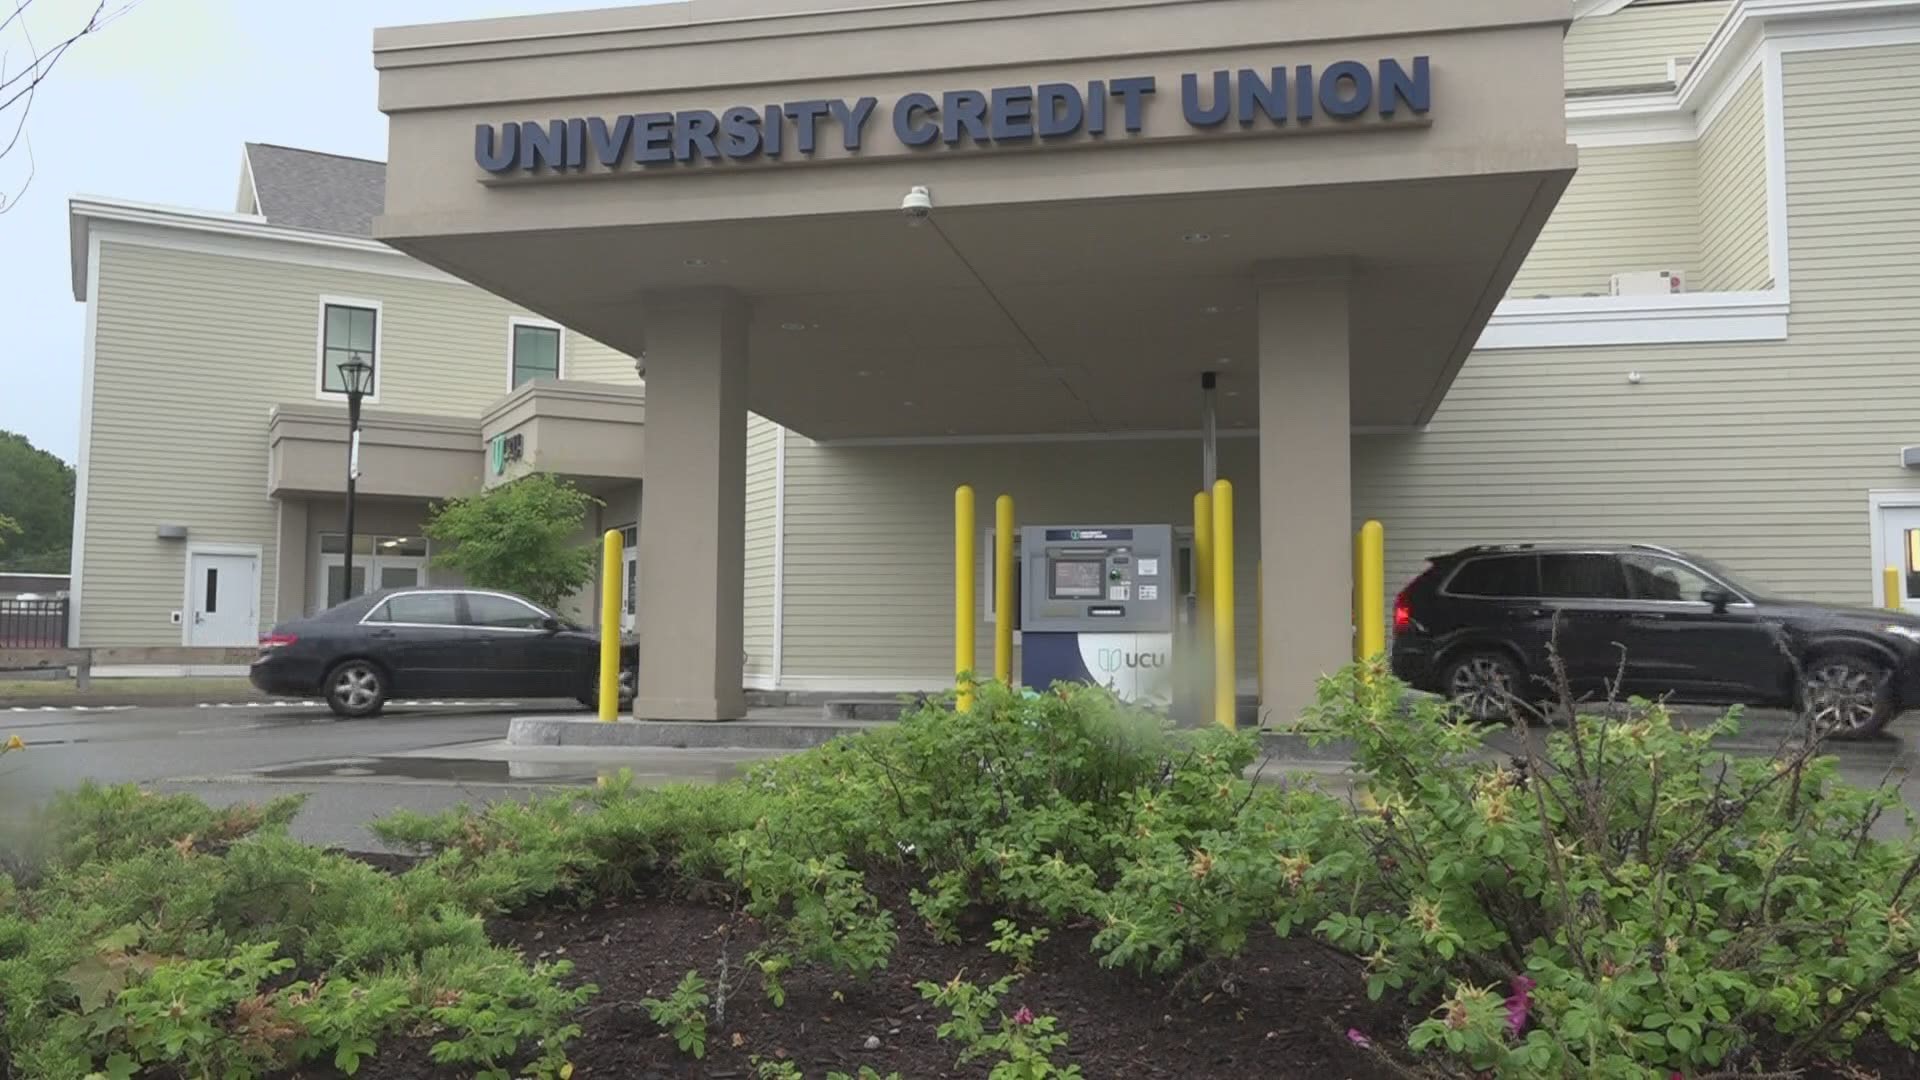 The University Credit Union has a new three-day initiative that aims to support some of the restaurants in Orono and give back to hungry Mainers